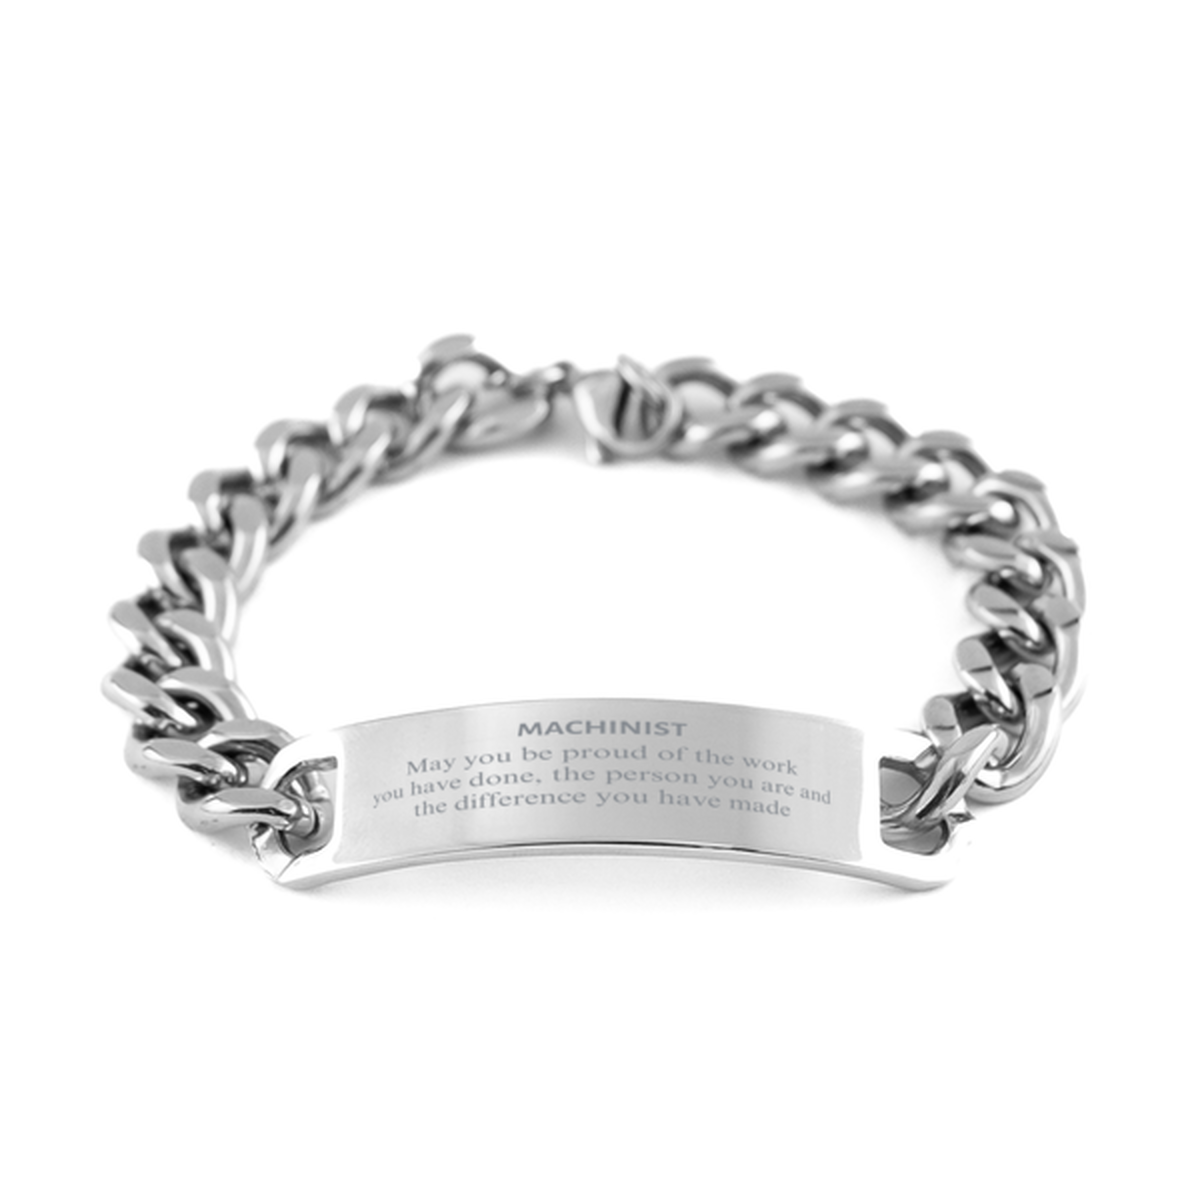 Machinist May you be proud of the work you have done, Retirement Machinist Cuban Chain Stainless Steel Bracelet for Colleague Appreciation Gifts Amazing for Machinist